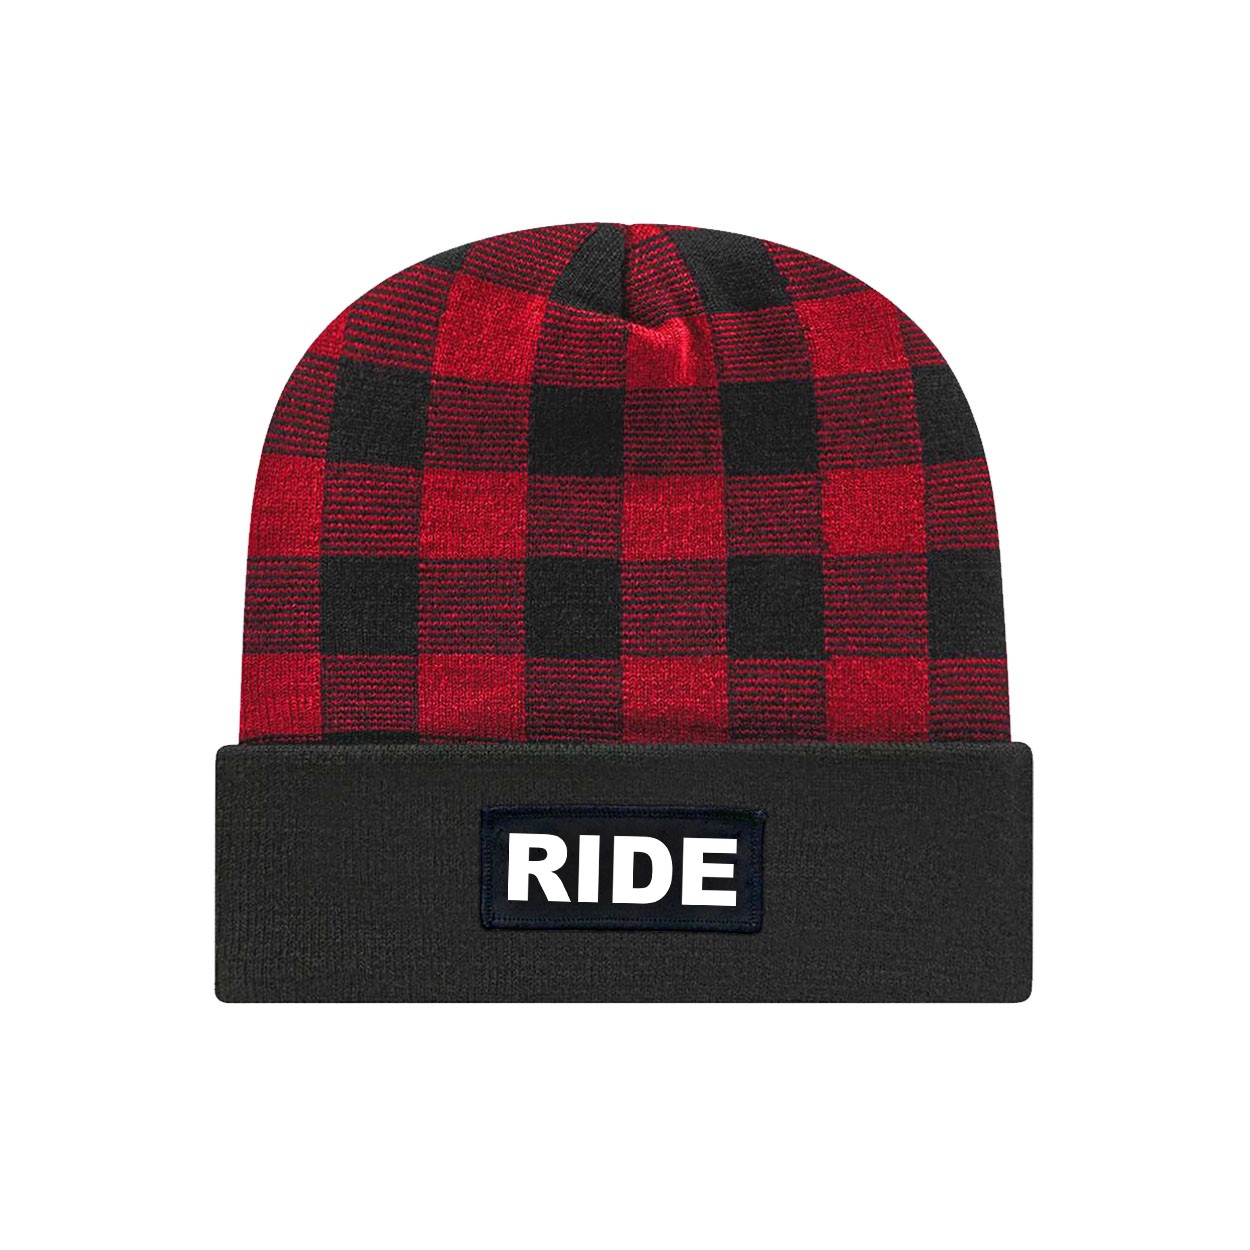 Ride Brand Logo Night Out Woven Patch Roll Up Plaid Beanie Black/True Red (White Logo)